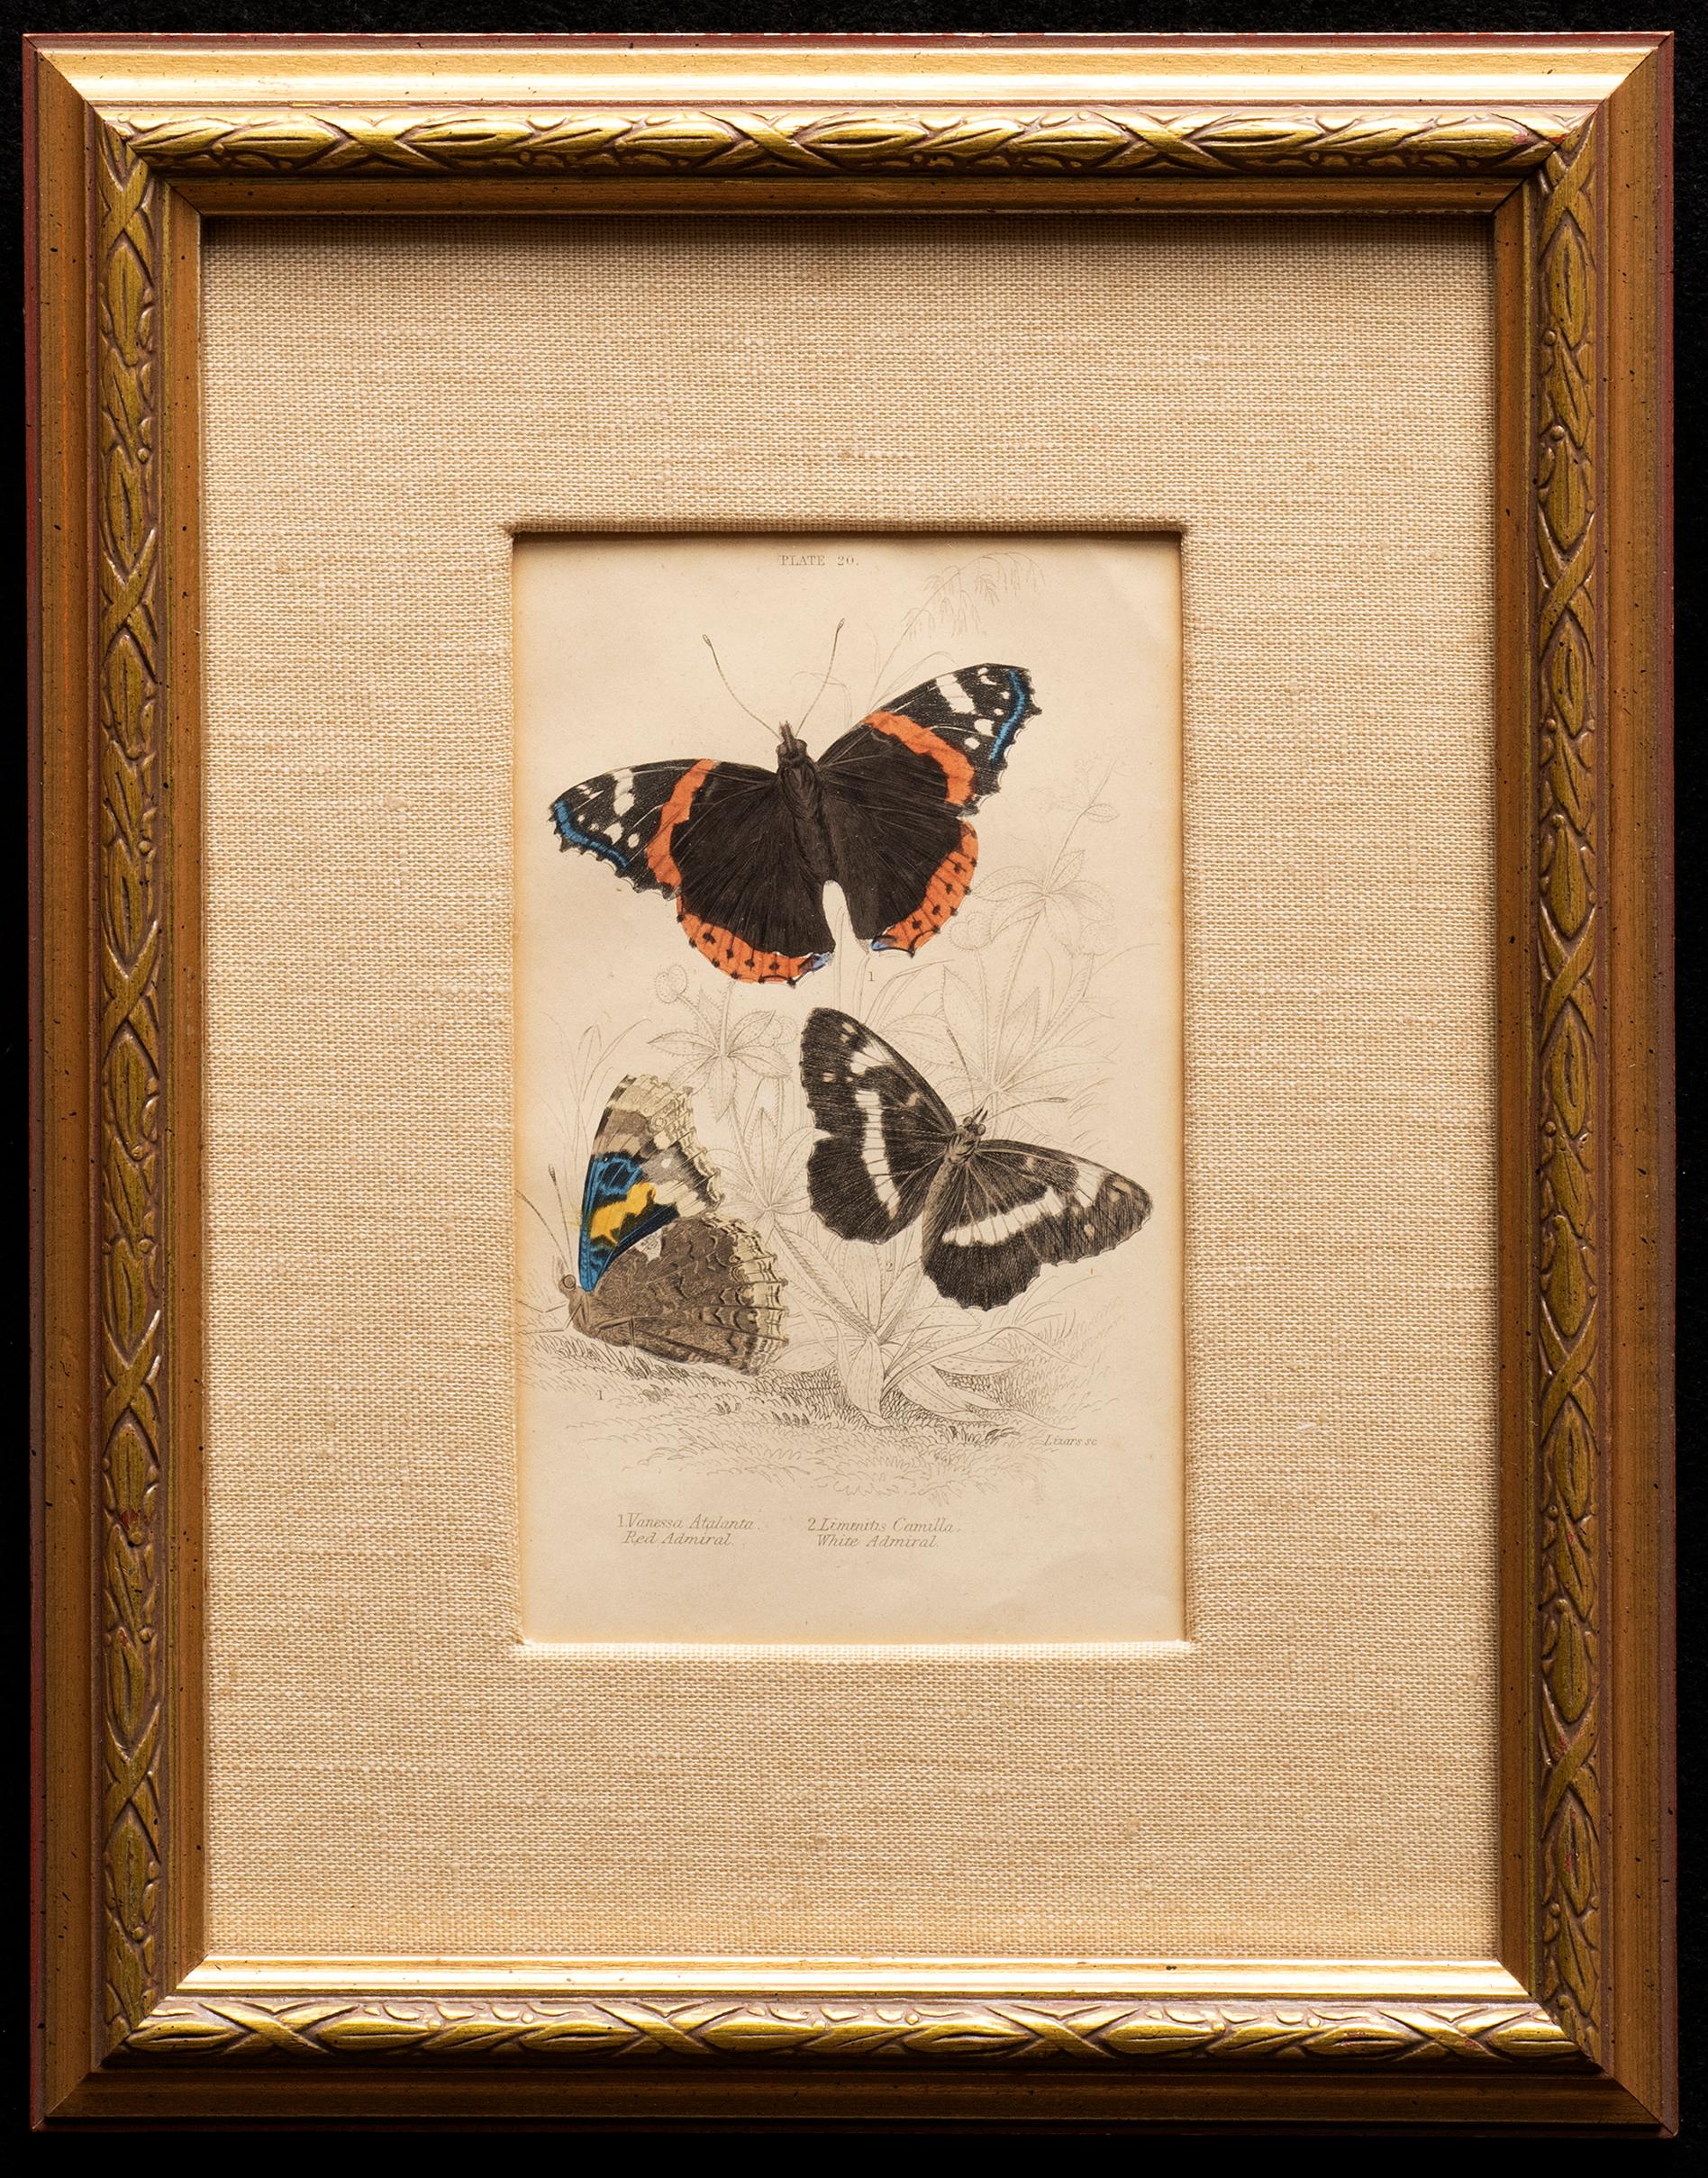 Set of 3 Hand-Colored Butterfly Prints
Purple Emperor, Small Tortoise Shell, Red & White Admiral 
William Home Lizars (Edinburgh, Scotland, 1788-1859)
Circa 1830's 
6 x 3 1/4 inches

A print-maker and engraver of exceptional prestige. 

His father